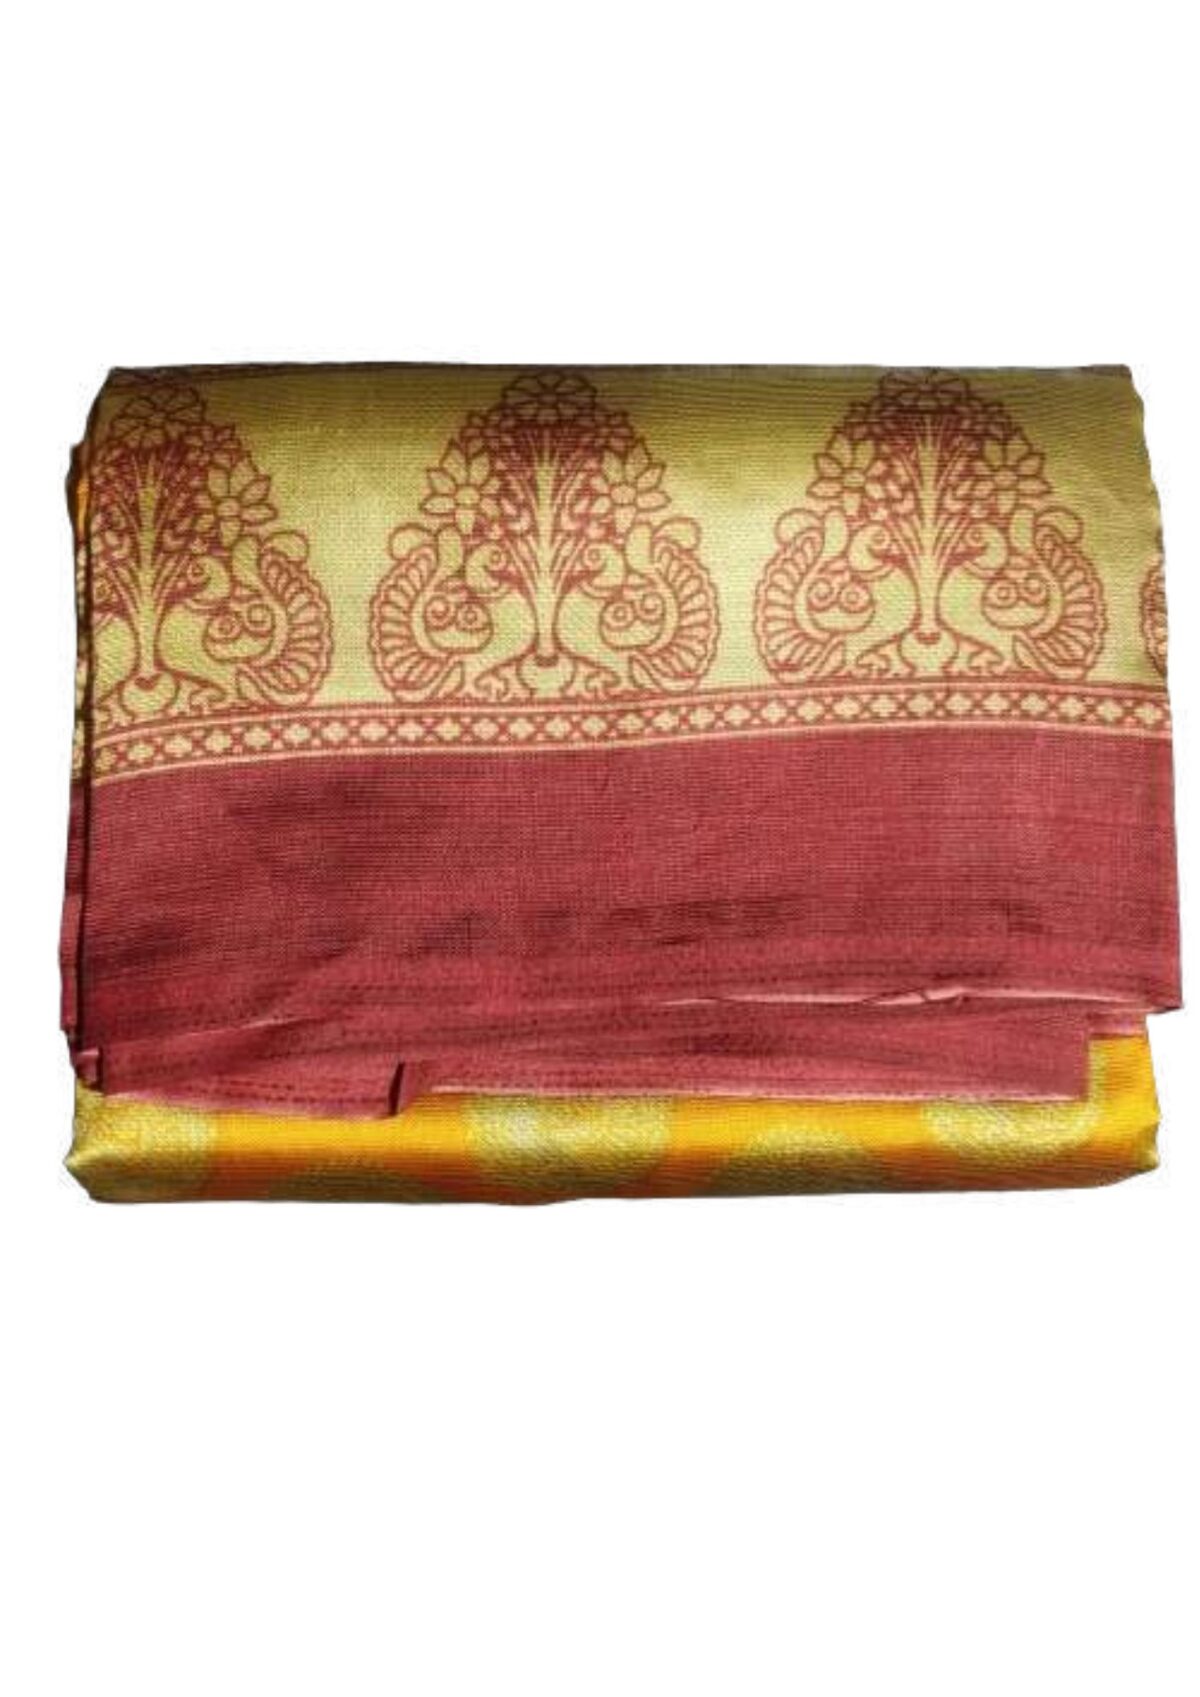 The Yellow and Red Tie-Dye Silk Saree is a vibrant and elegant piece of traditional Indian attire. Crafted from luxurious silk fabric, this saree features a mesmerizing blend of yellow and red hues, creating a stunning tie-dye pattern. The tie-dye technique adds a unique and artistic touch to the saree, making it a standout choice for special occasions.